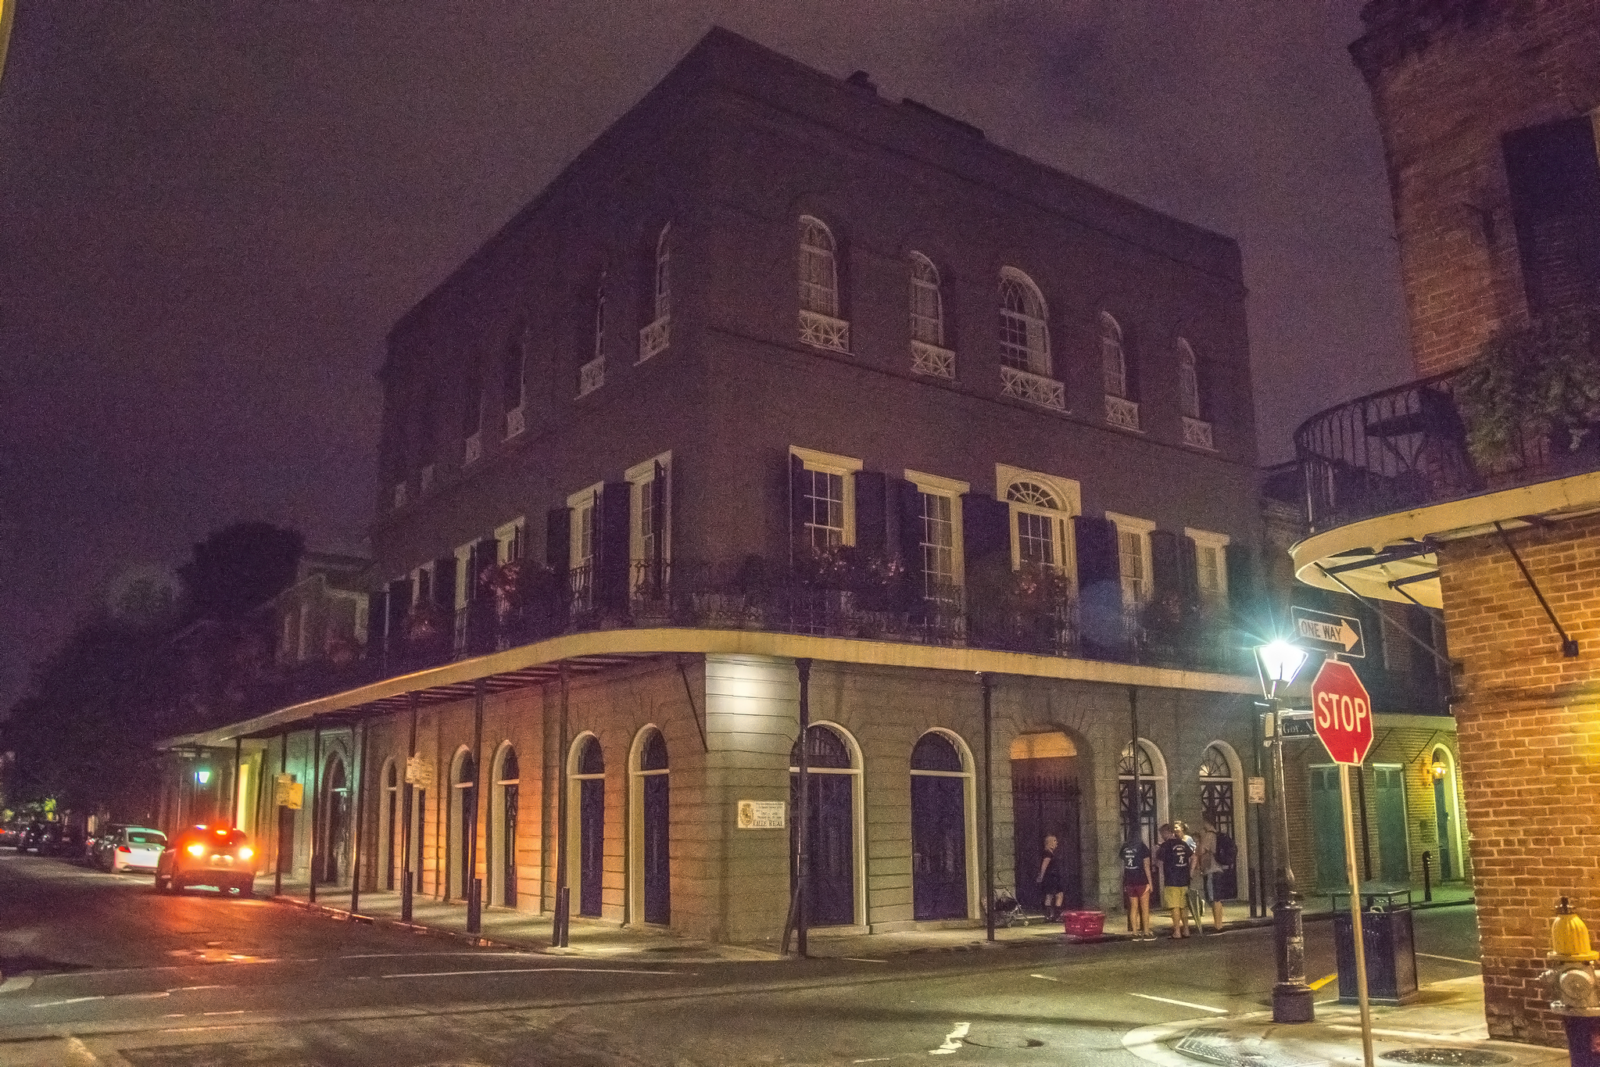 What really happened at the Lalaurie House?